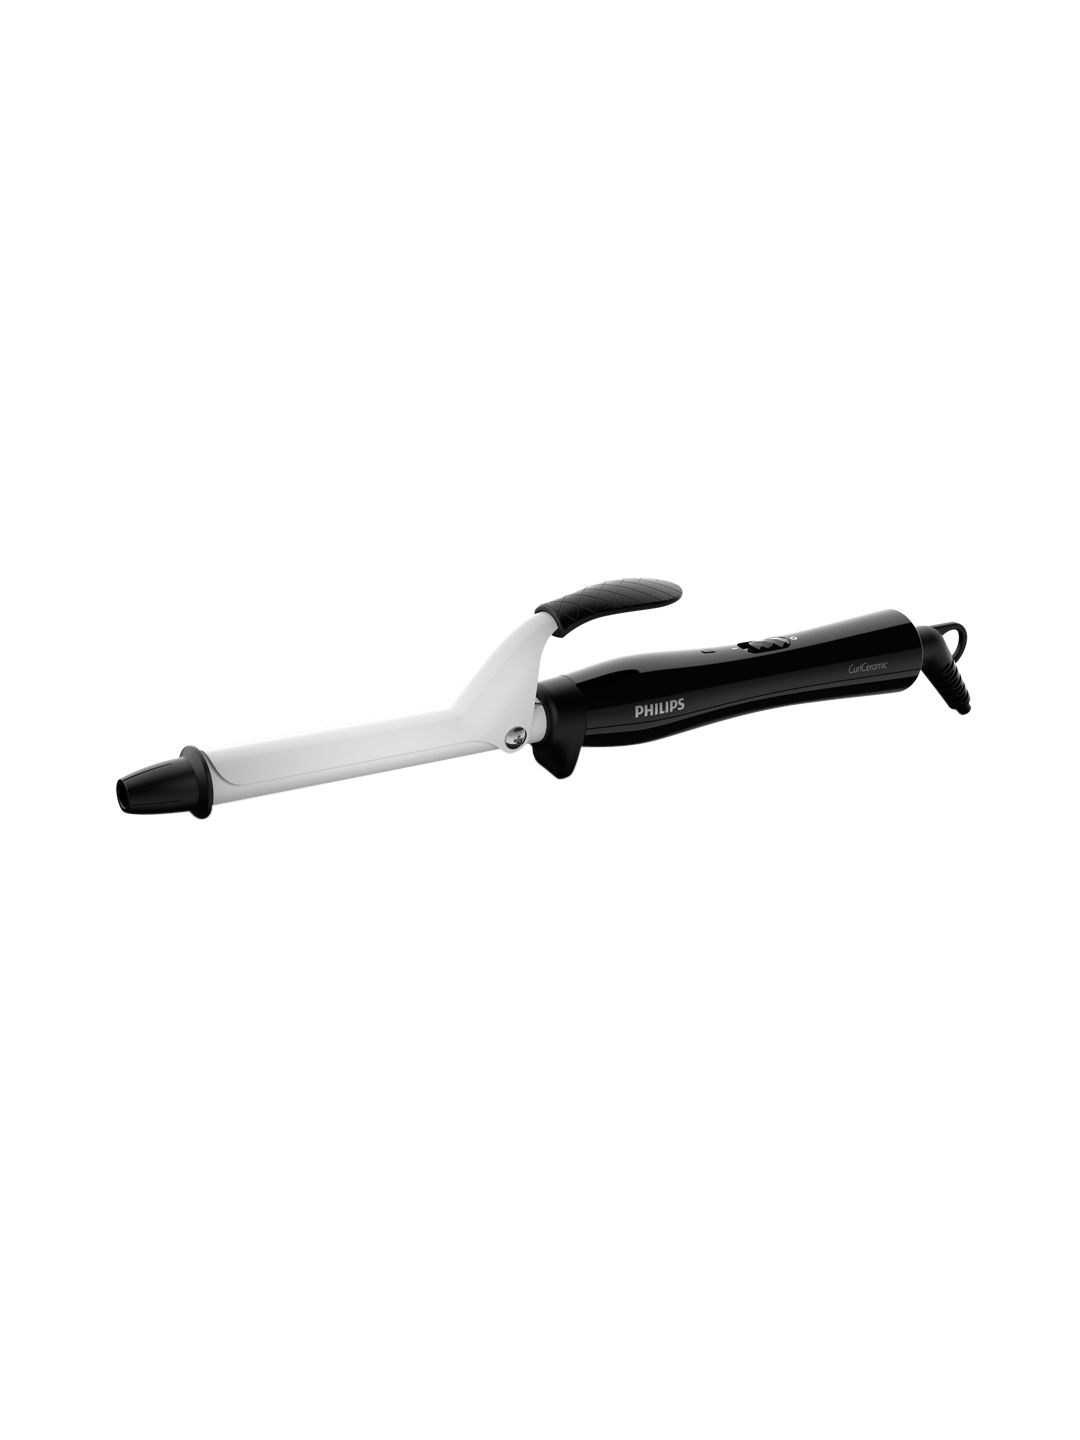 Philips BHB862/00 StyleCare Essential Hair Curler - Black & White Price in India